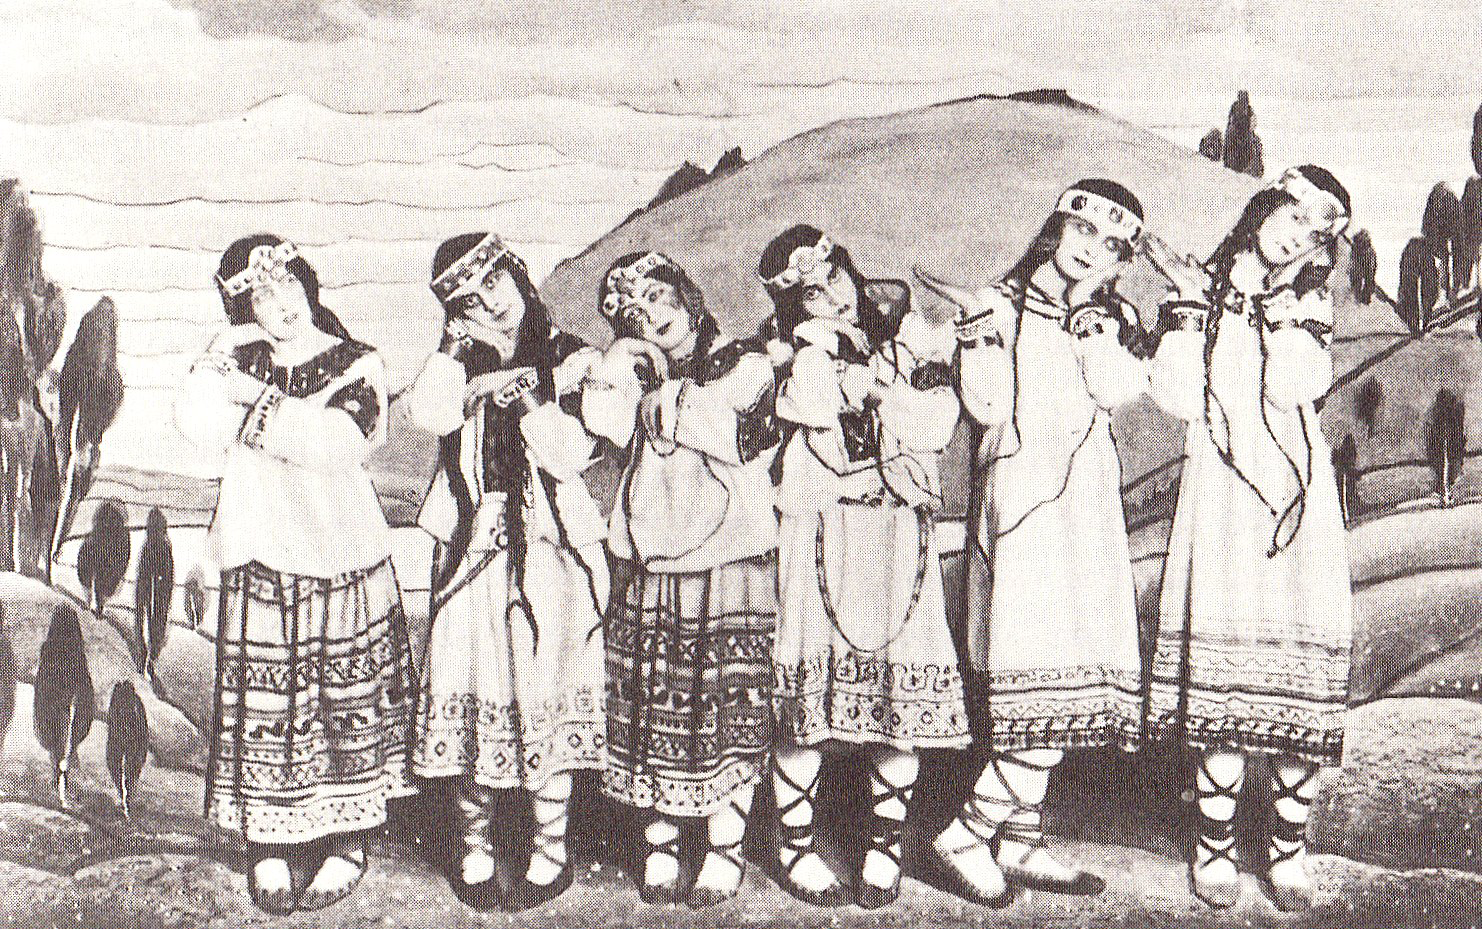 A posed group of dancers in the original production of Igor Stravinsky's ballet The Rite of Spring, showing costumes and backdrop by Nicholas Roerich.